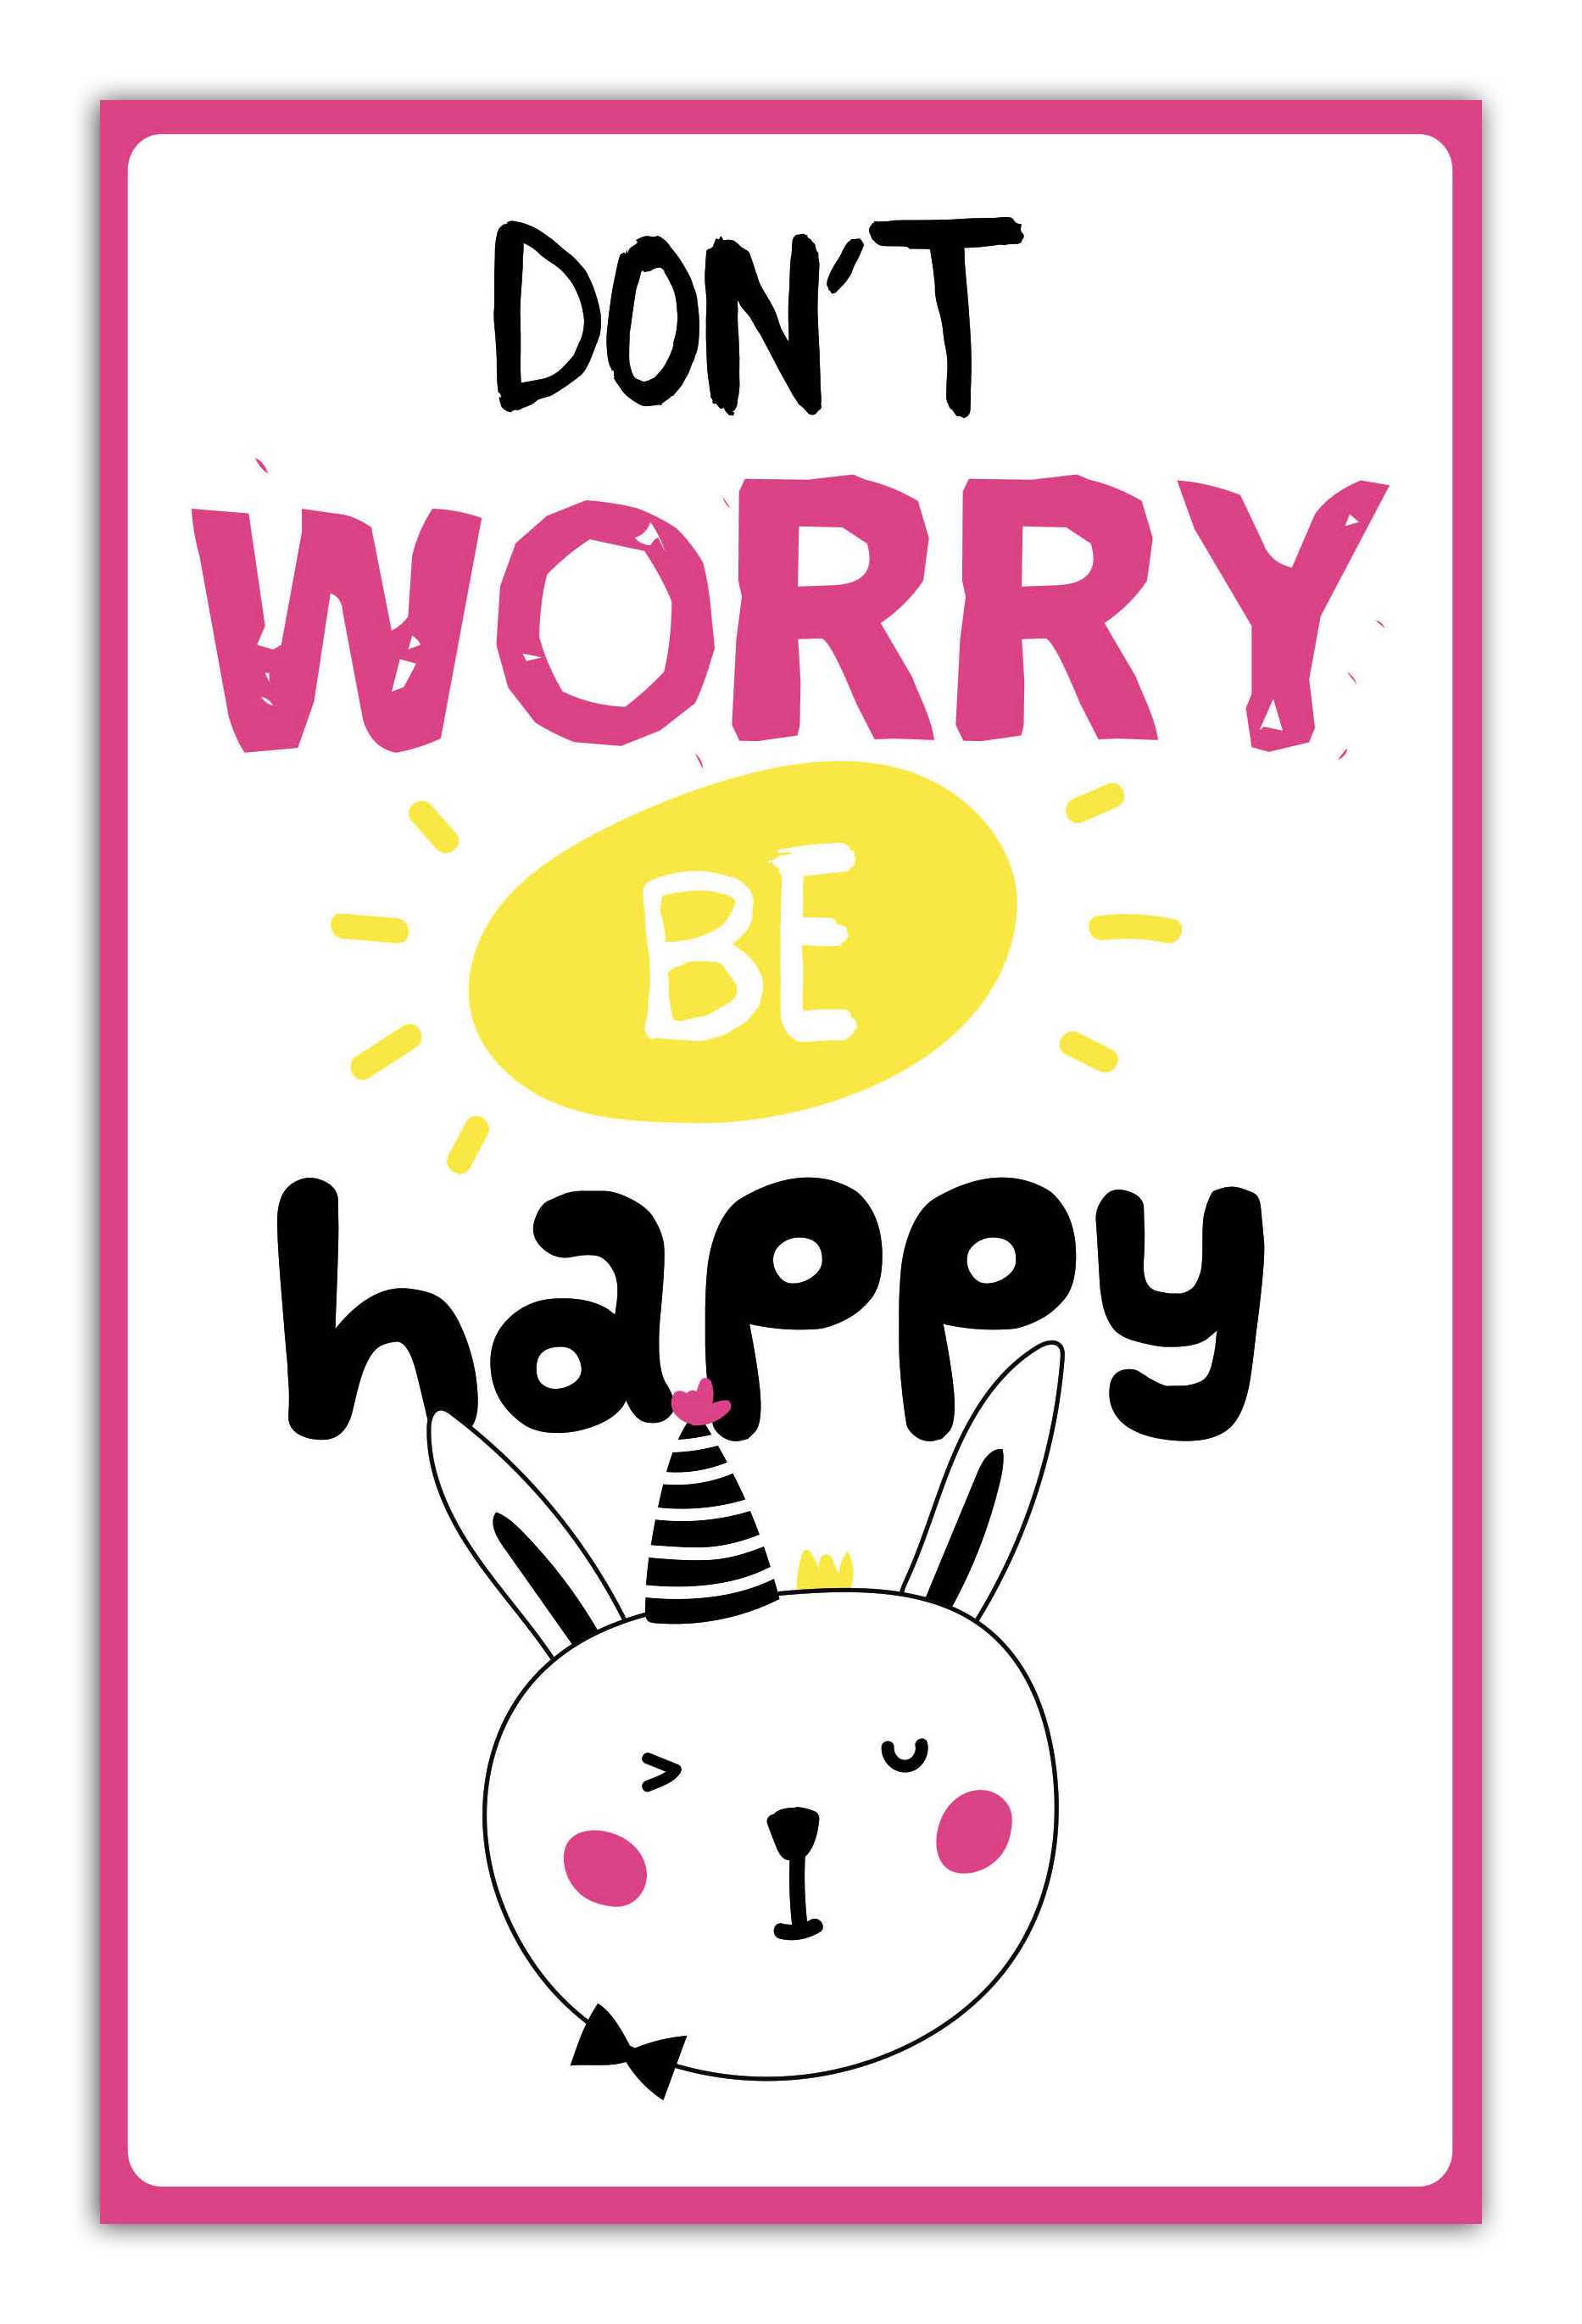 Don t worry dont. Don`t worry be Happy. Don't worry be Happy картинки. Открытка don't worry be Happy. Надпись don't worry be Happy.